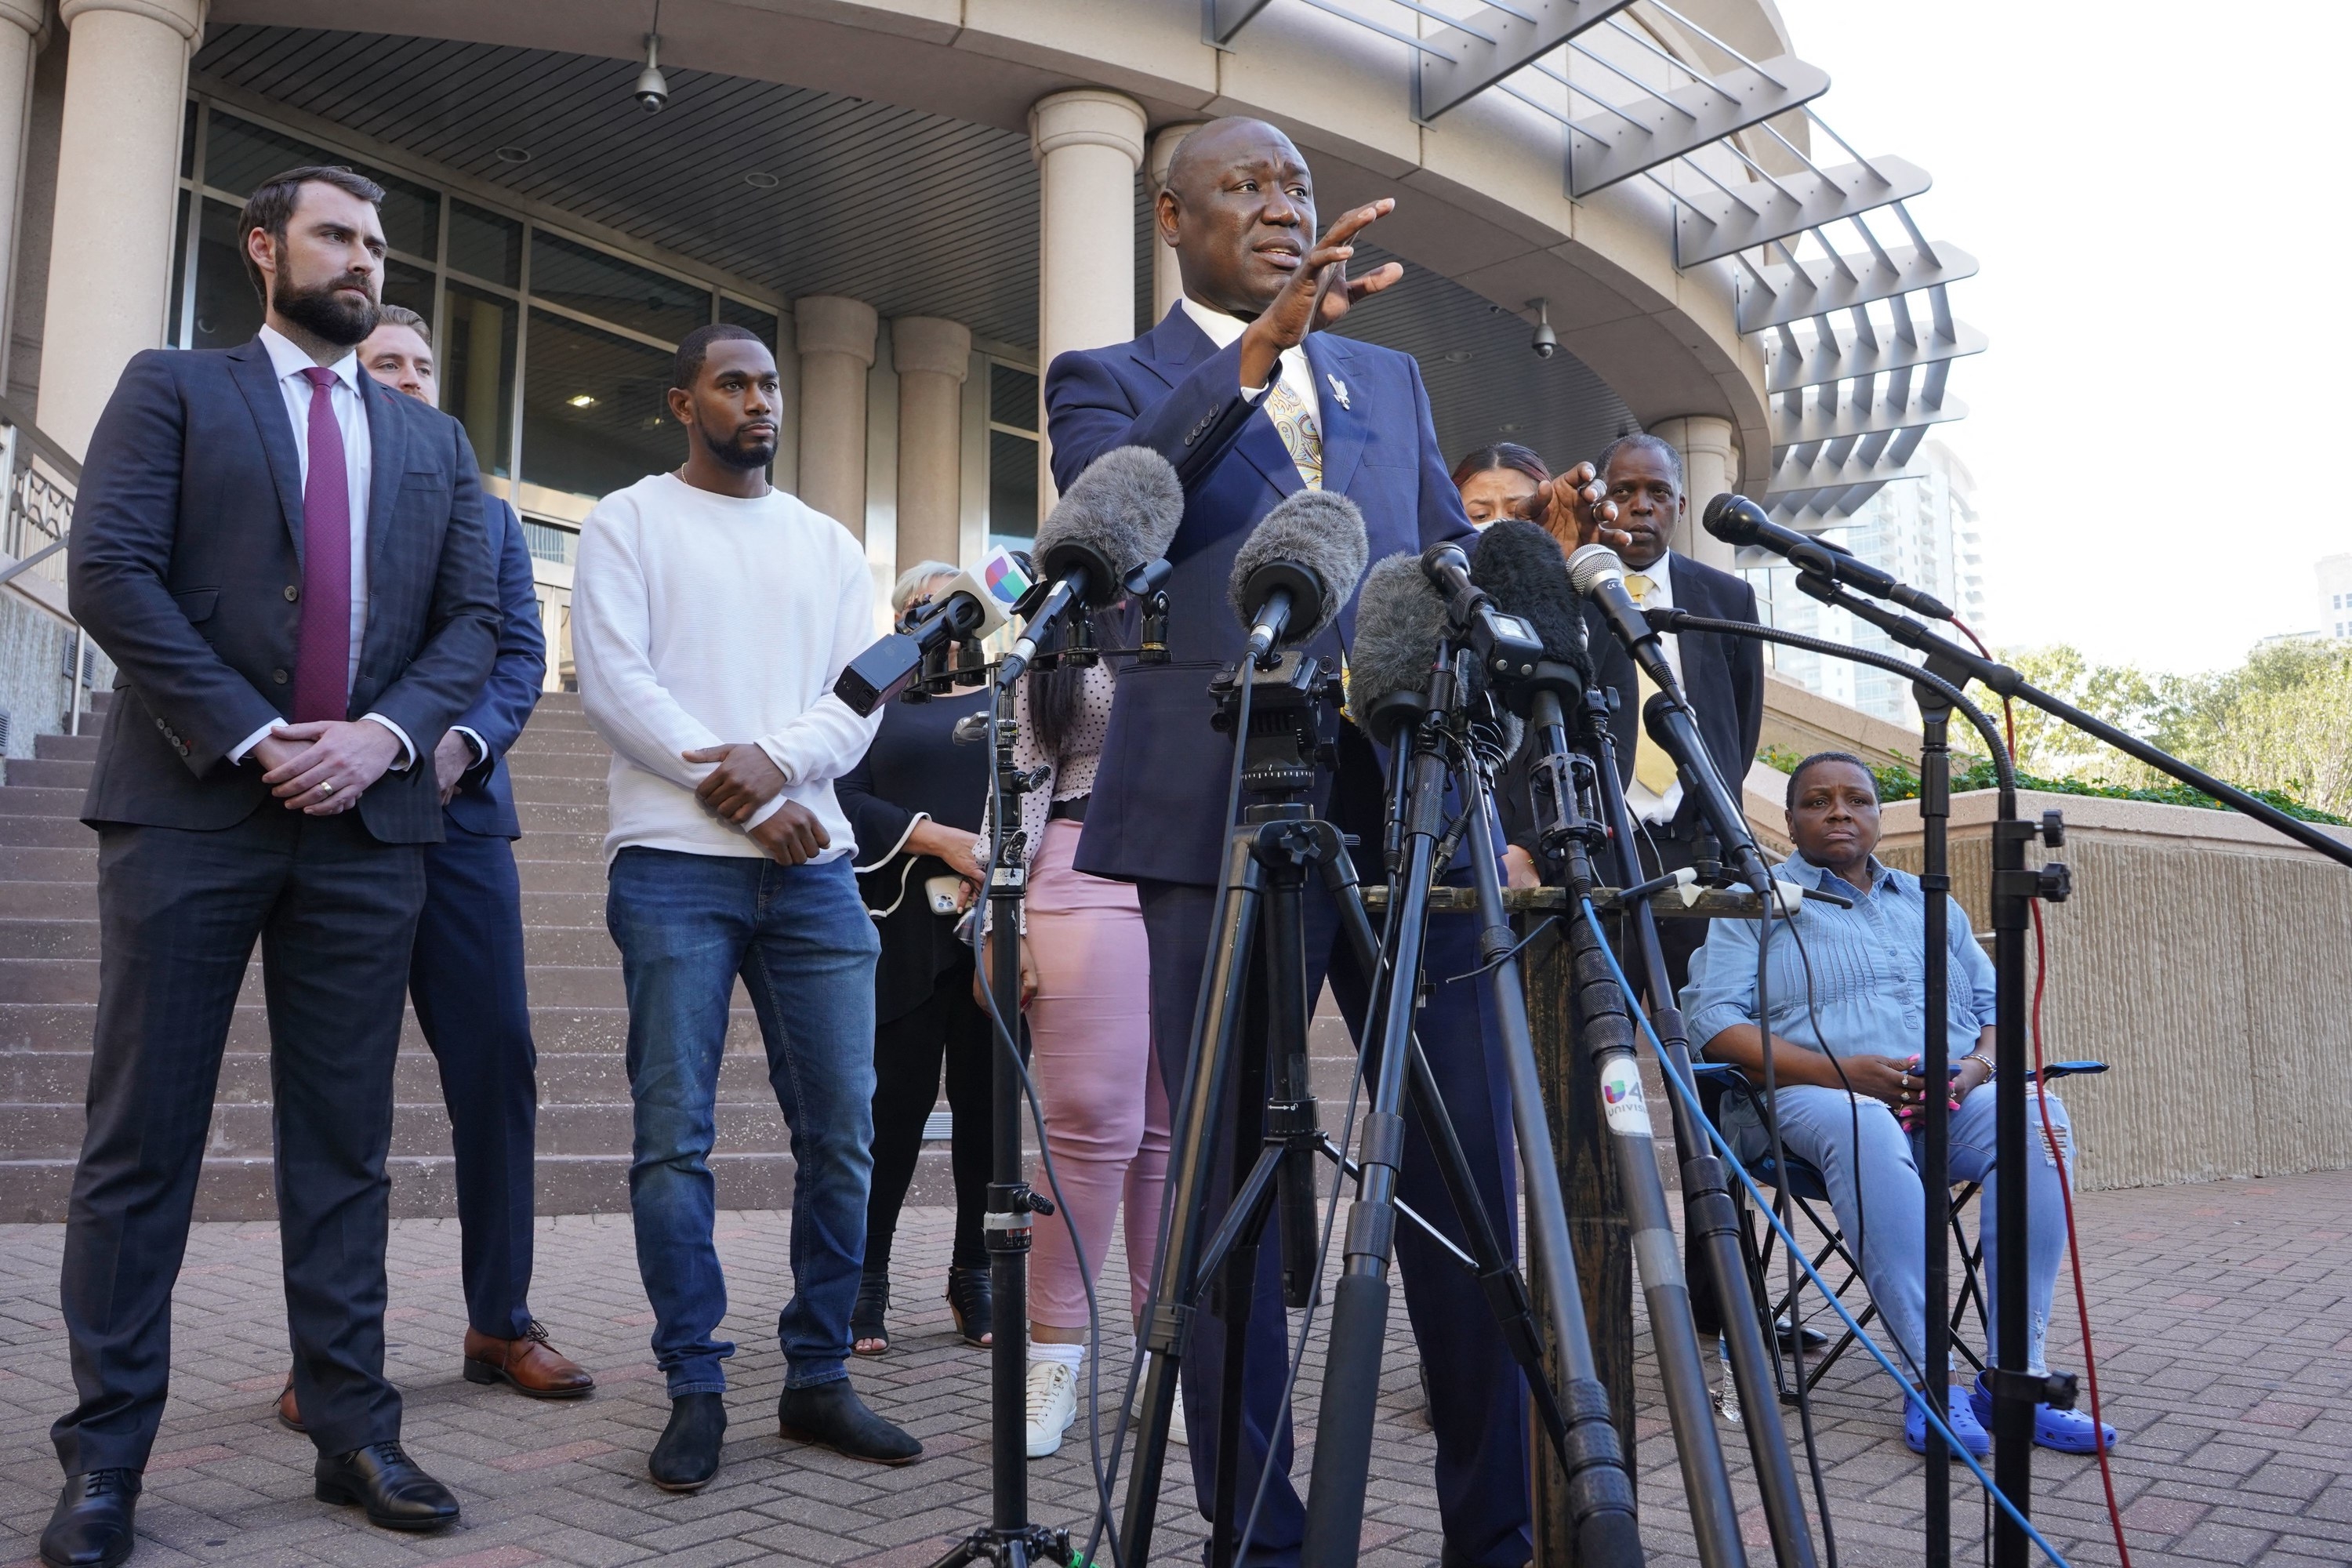 Attorney Ben Crump speaks during a press conference on Nov. 12, 2021, in Houston